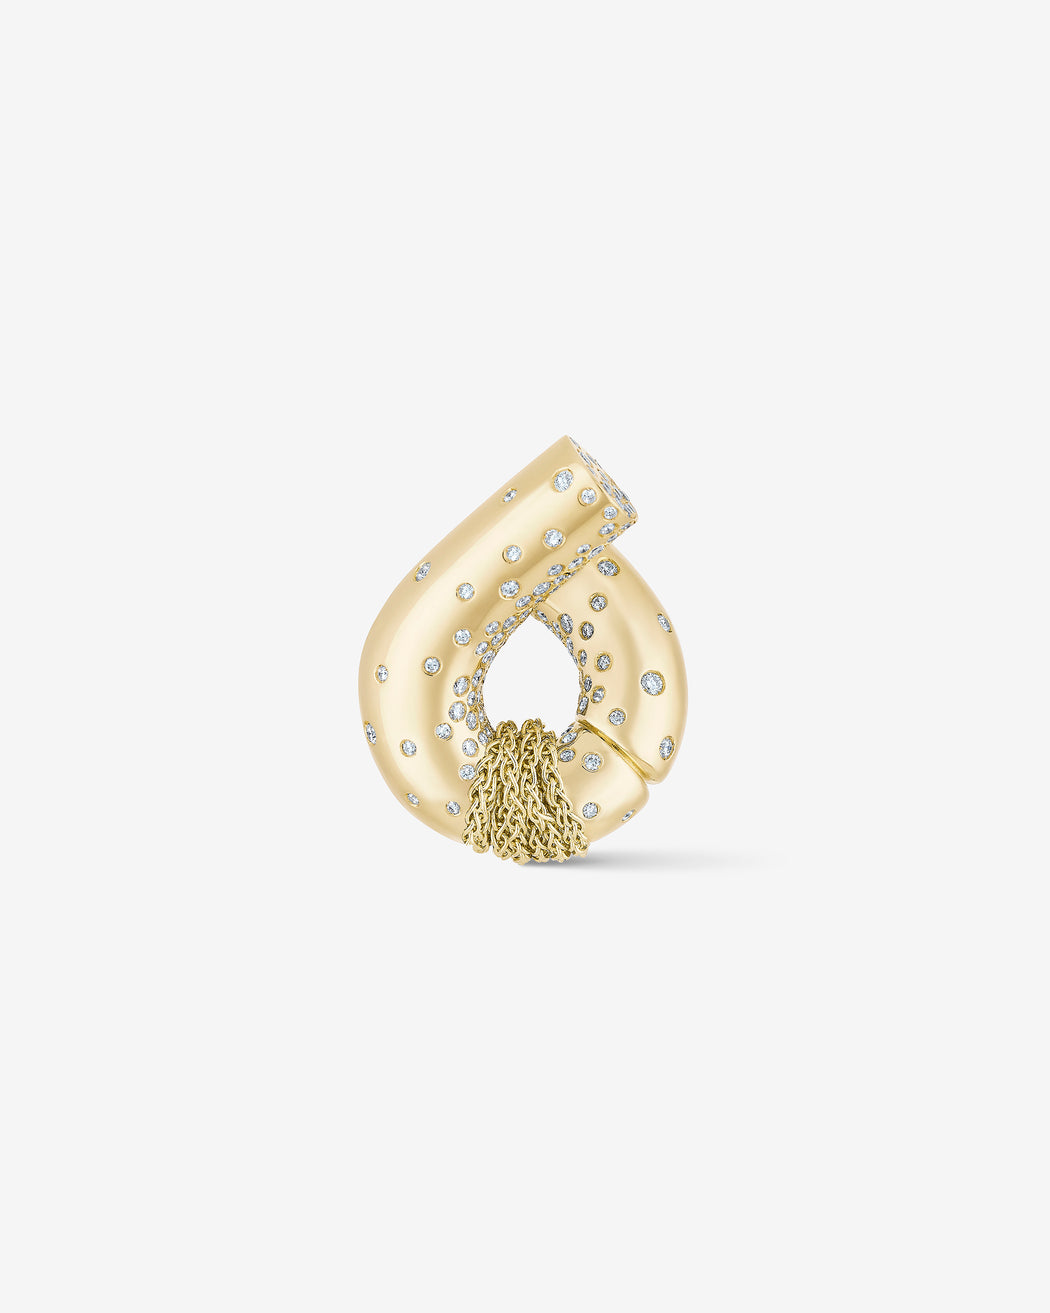 Oera earrings 18k Fairmined yellow gold and diamonds, Tabayer ethical fine jewelry